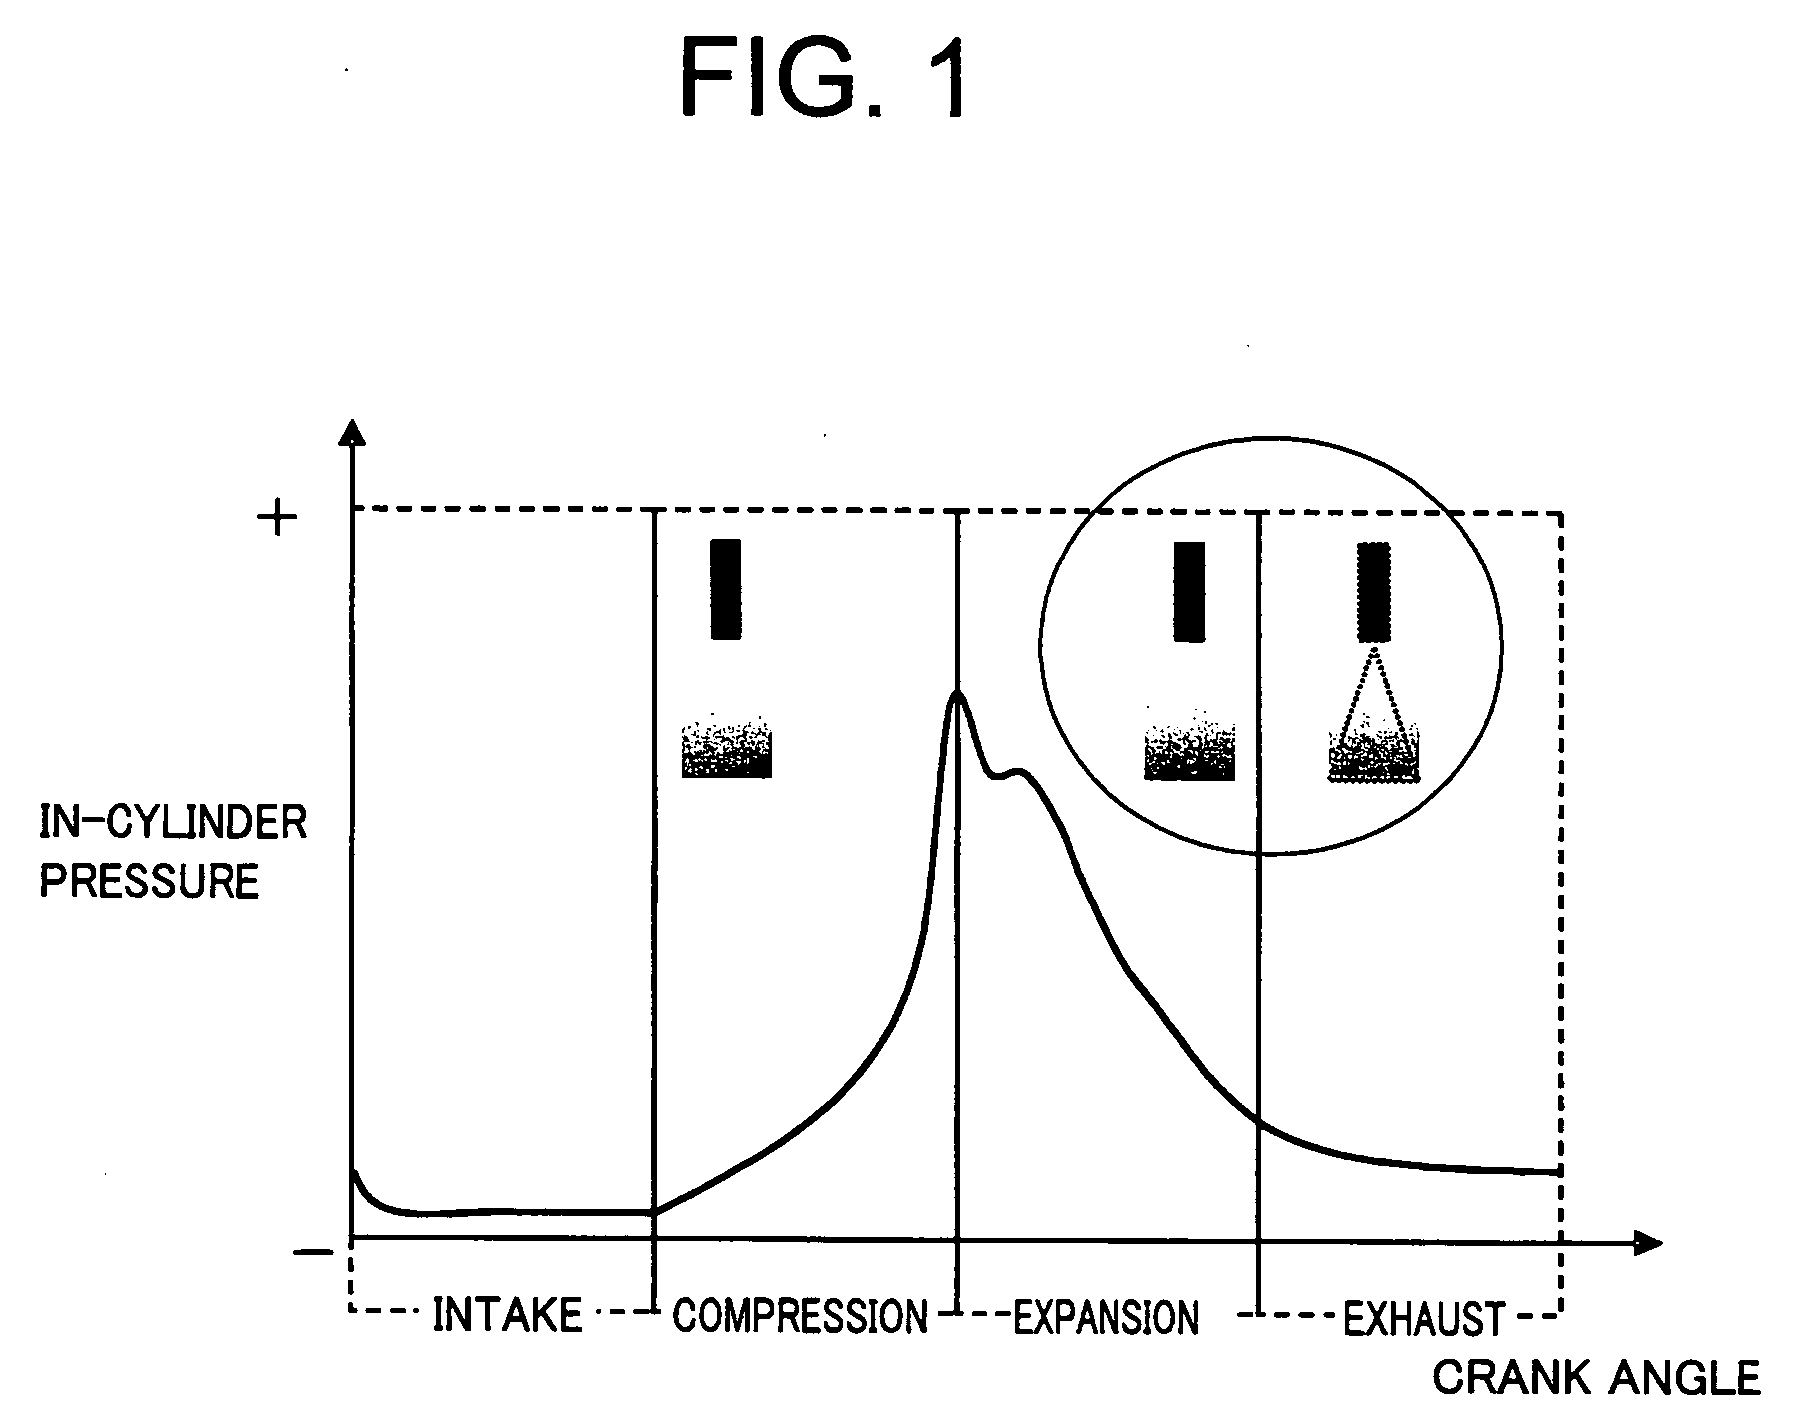 Electronic control system for controlling plant temperature